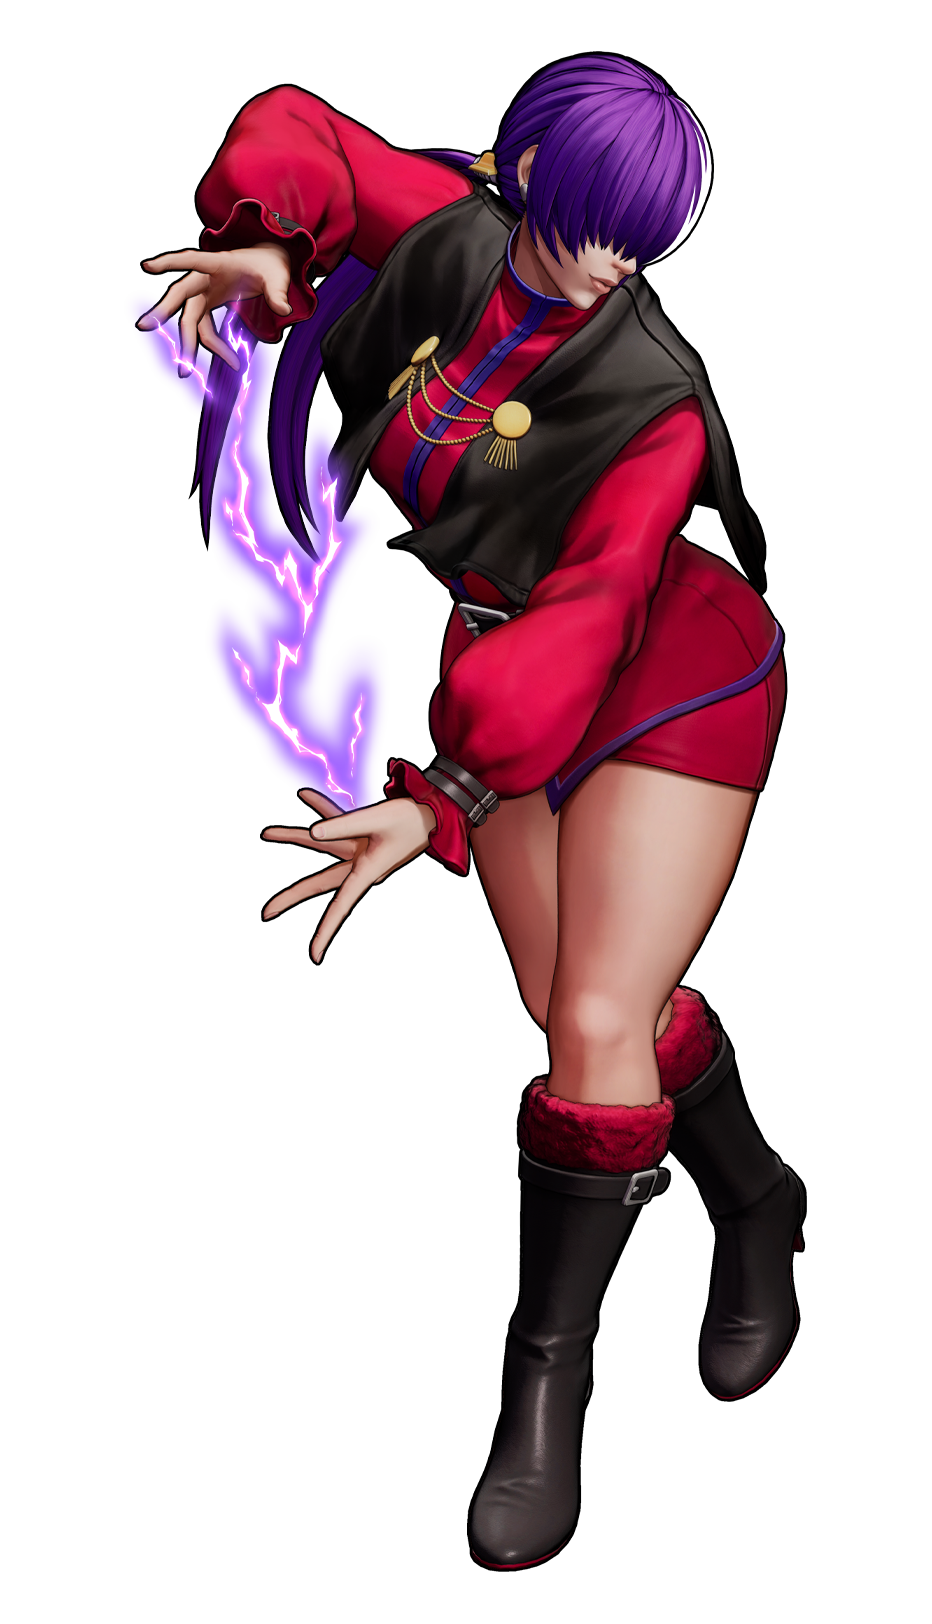 King of fighters shermie